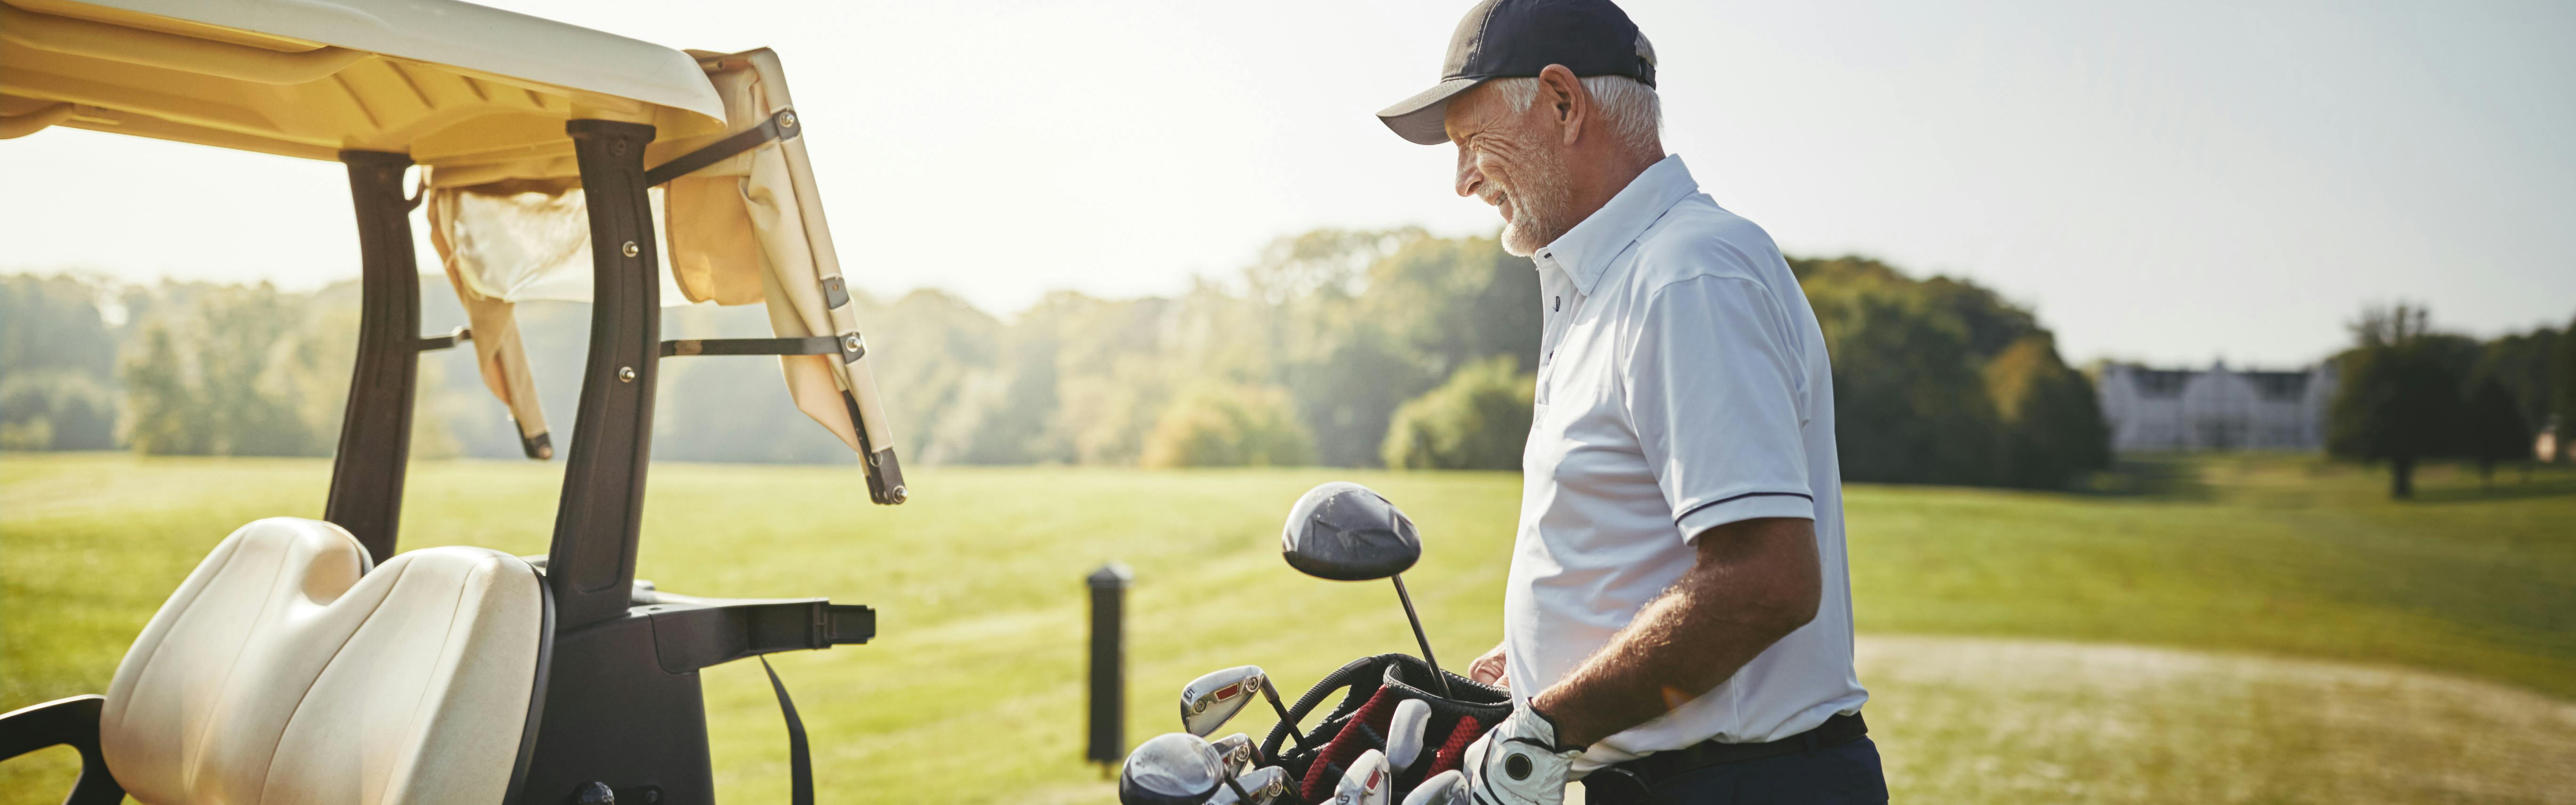 5 Best Golf Club Sets for Seniors: An Expert Guide | Curated.com